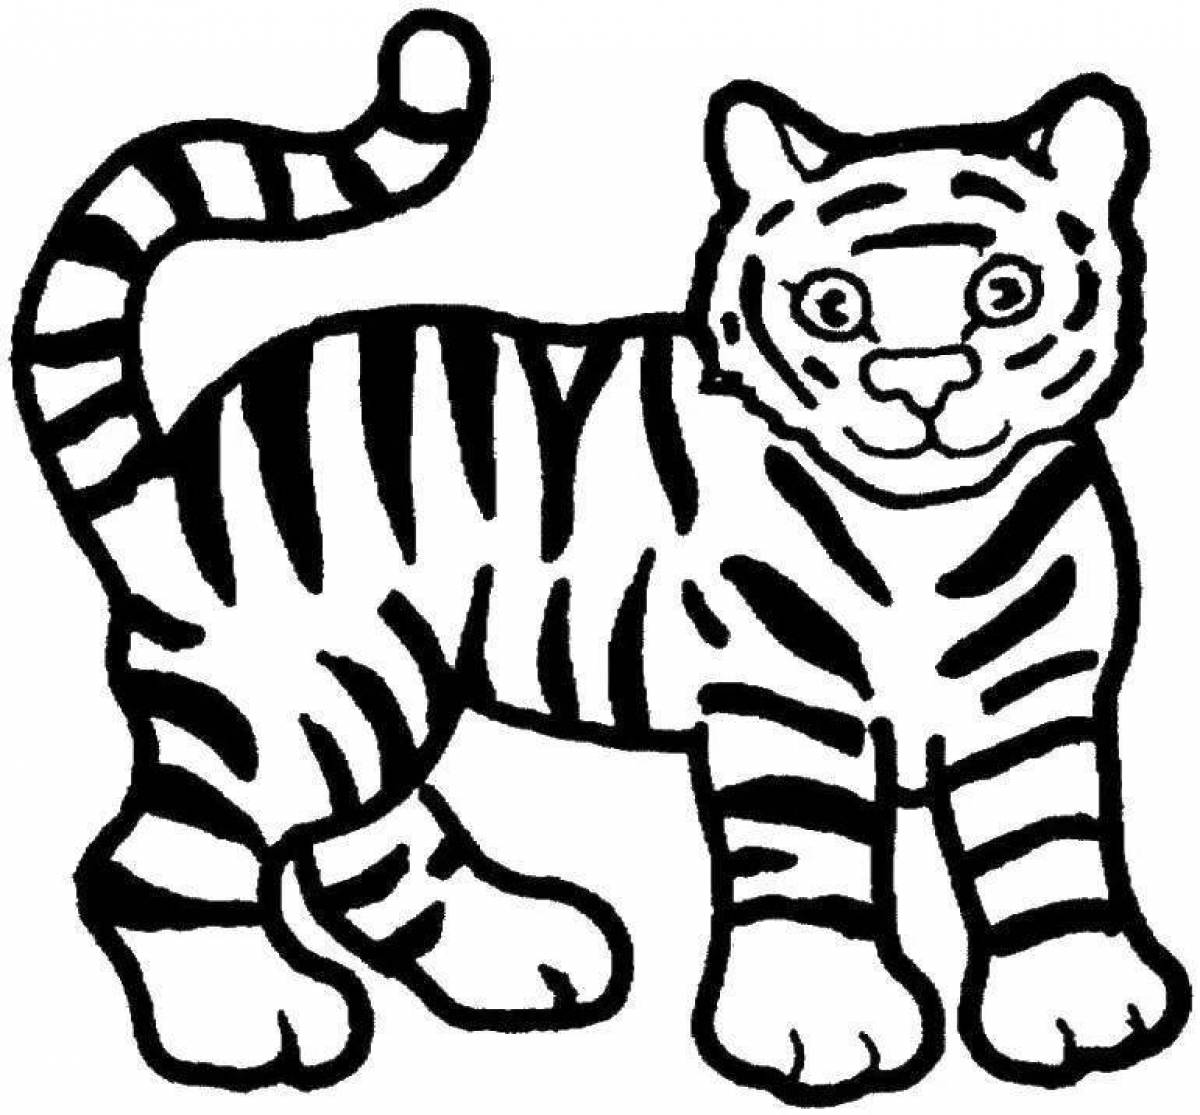 Coloring bright tiger for kids